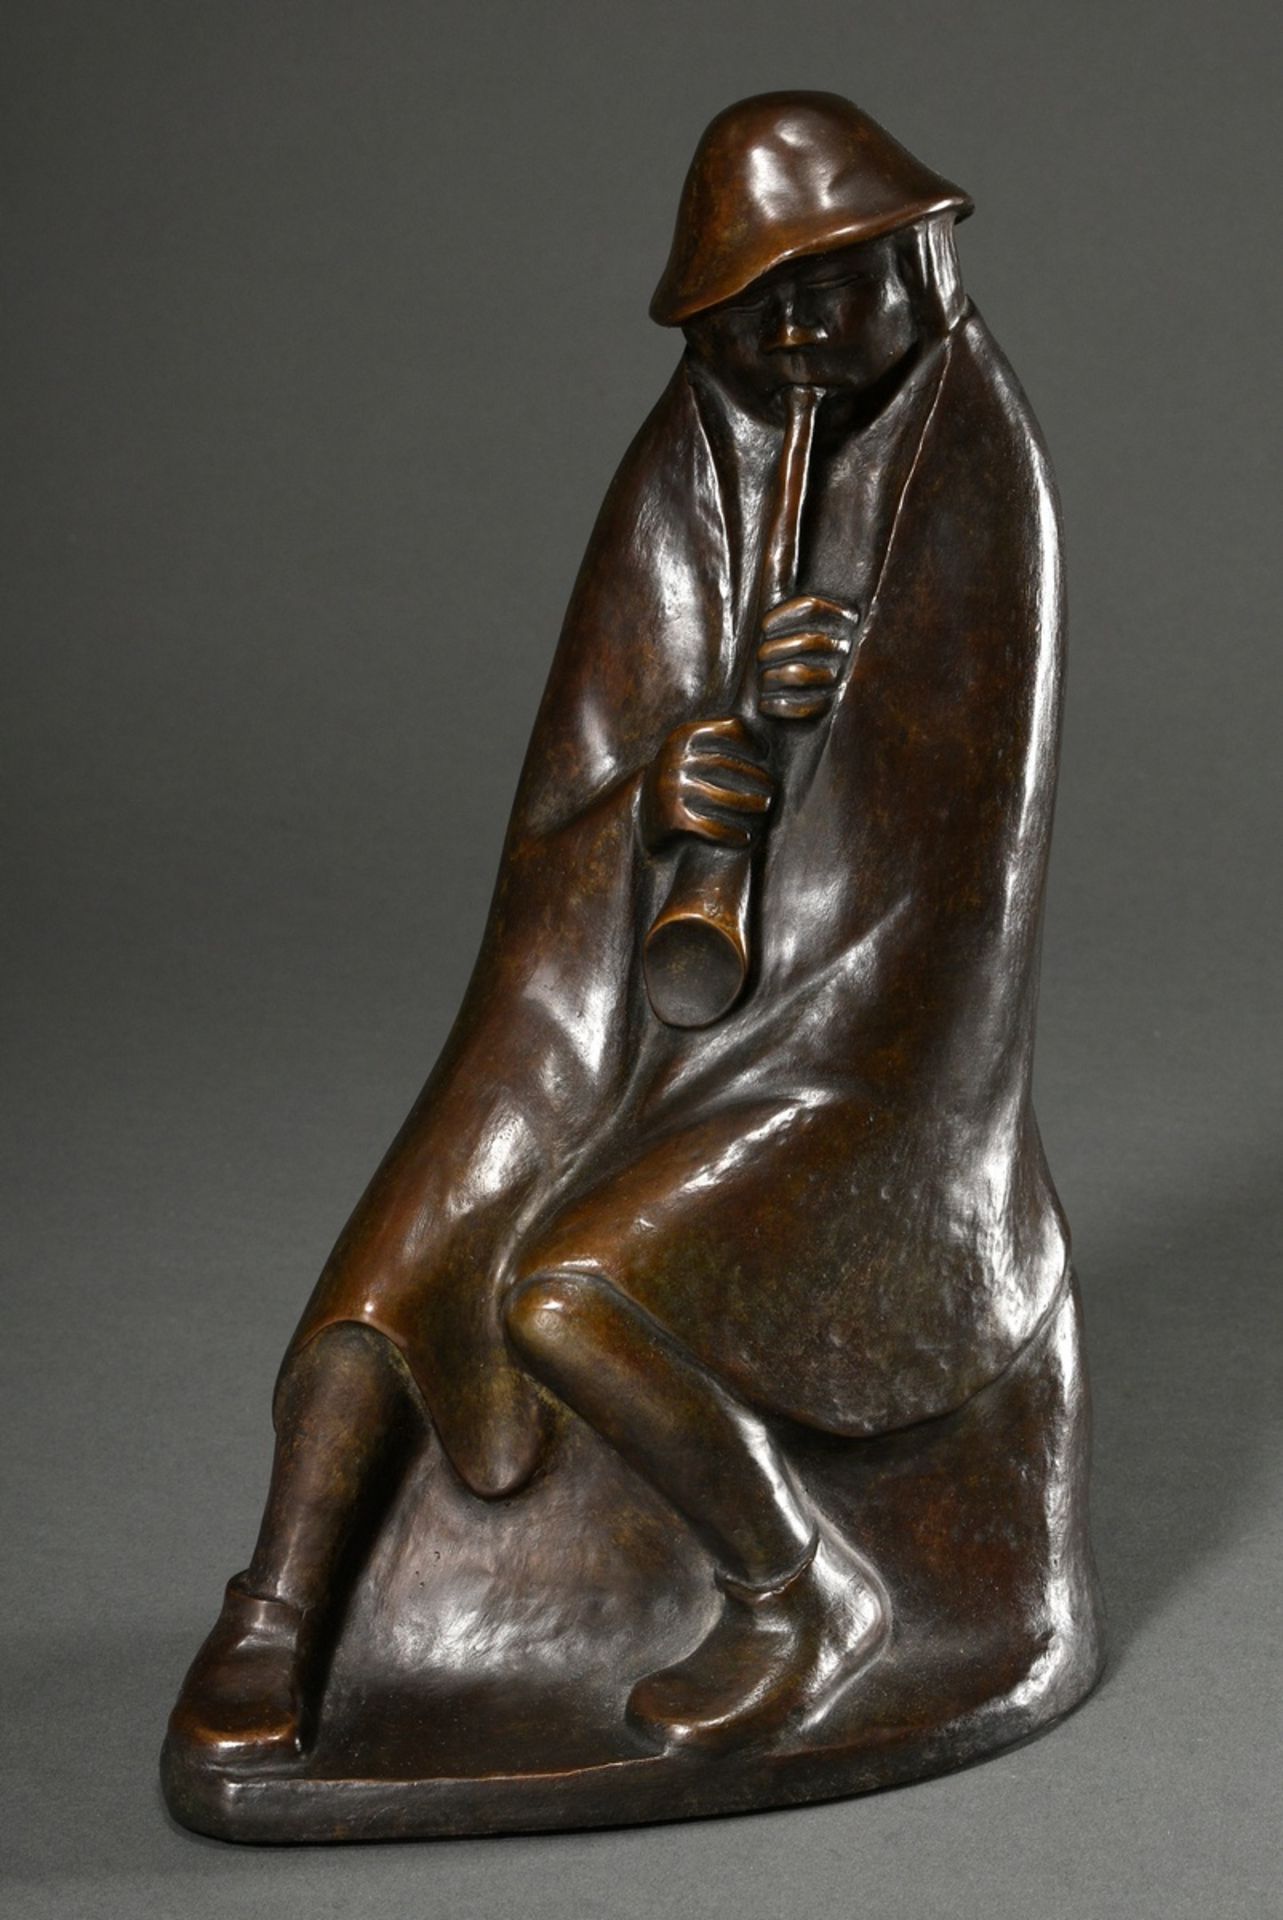 Barlach, Ernst (1870-1938) "The Flute Player" 1936, patinated bronze, 119/980, b. sign/num., posthu